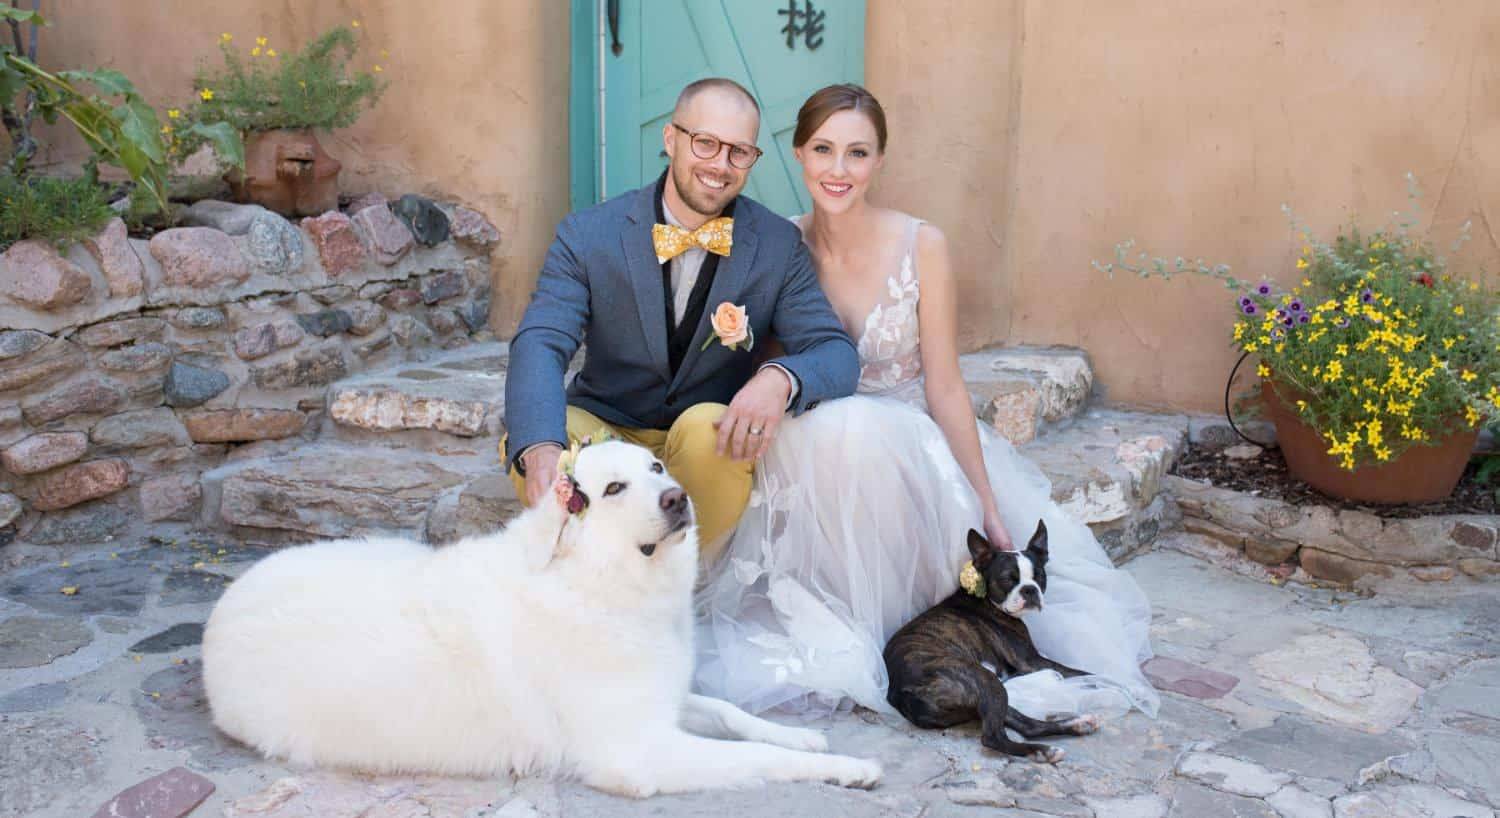 Bride and groom sitting on stone steps petting large white dog and small black and white dog